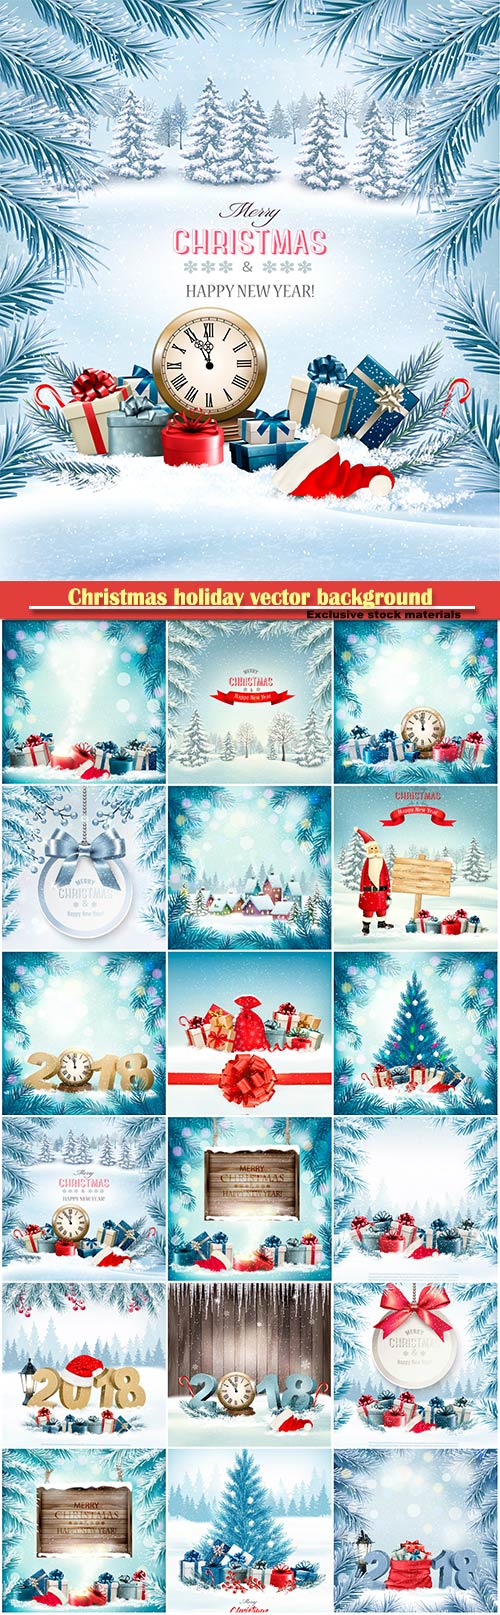 Christmas holiday vector background with a blue tree and presents